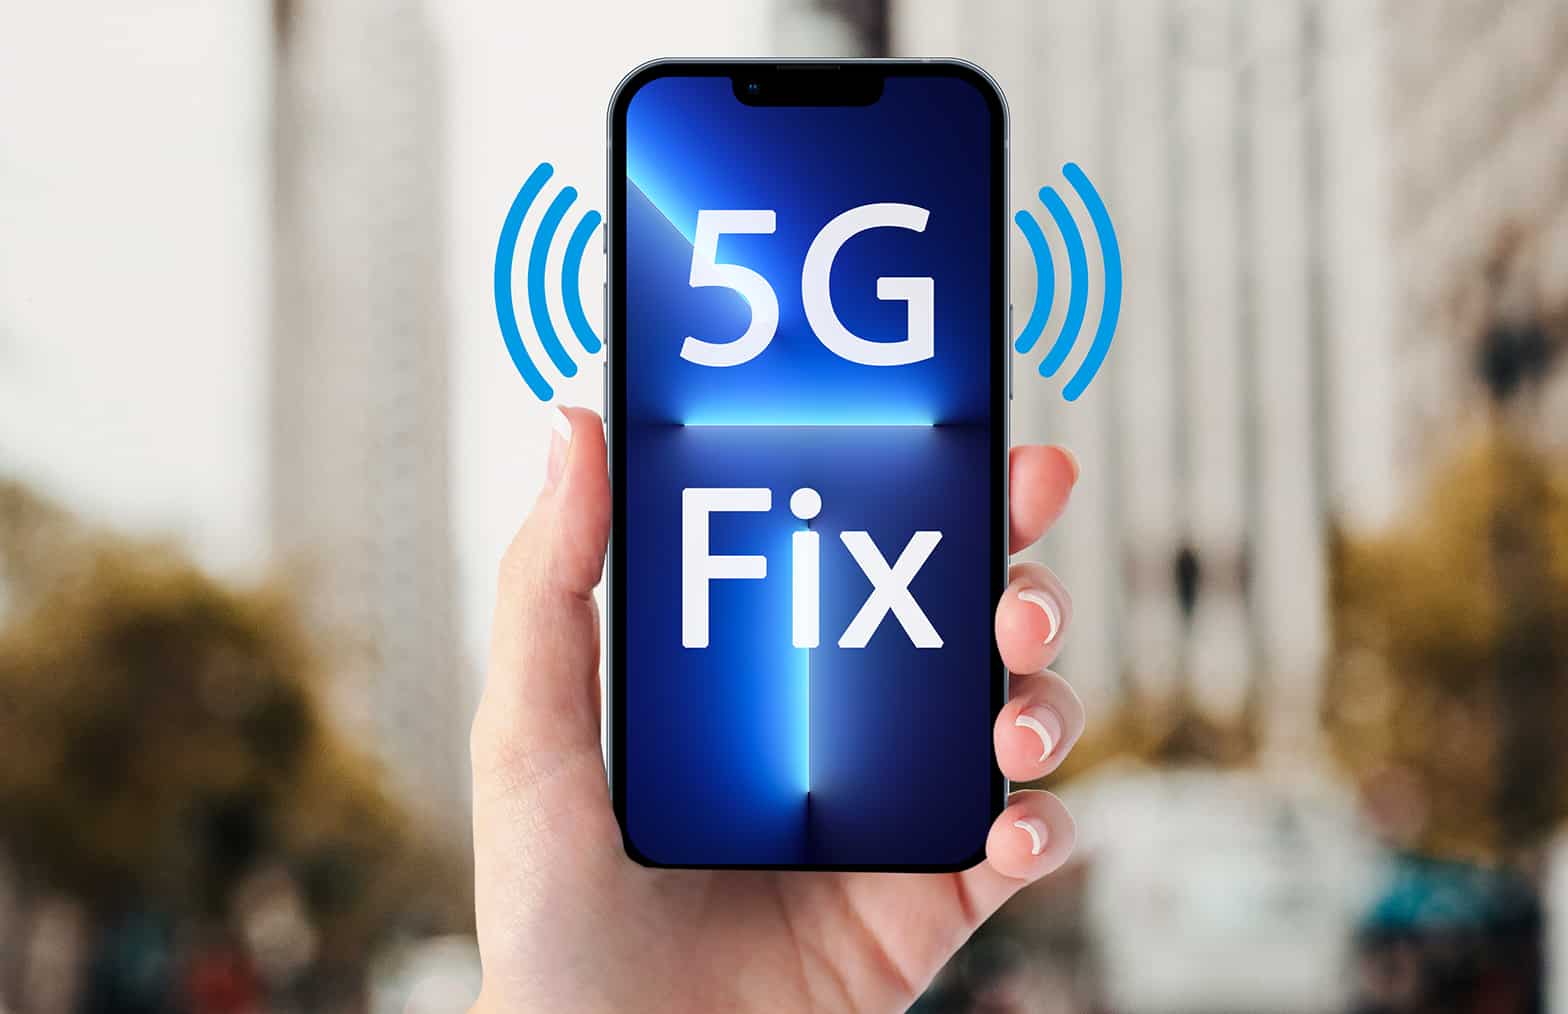 Fix 5G network issue on iPhone 13